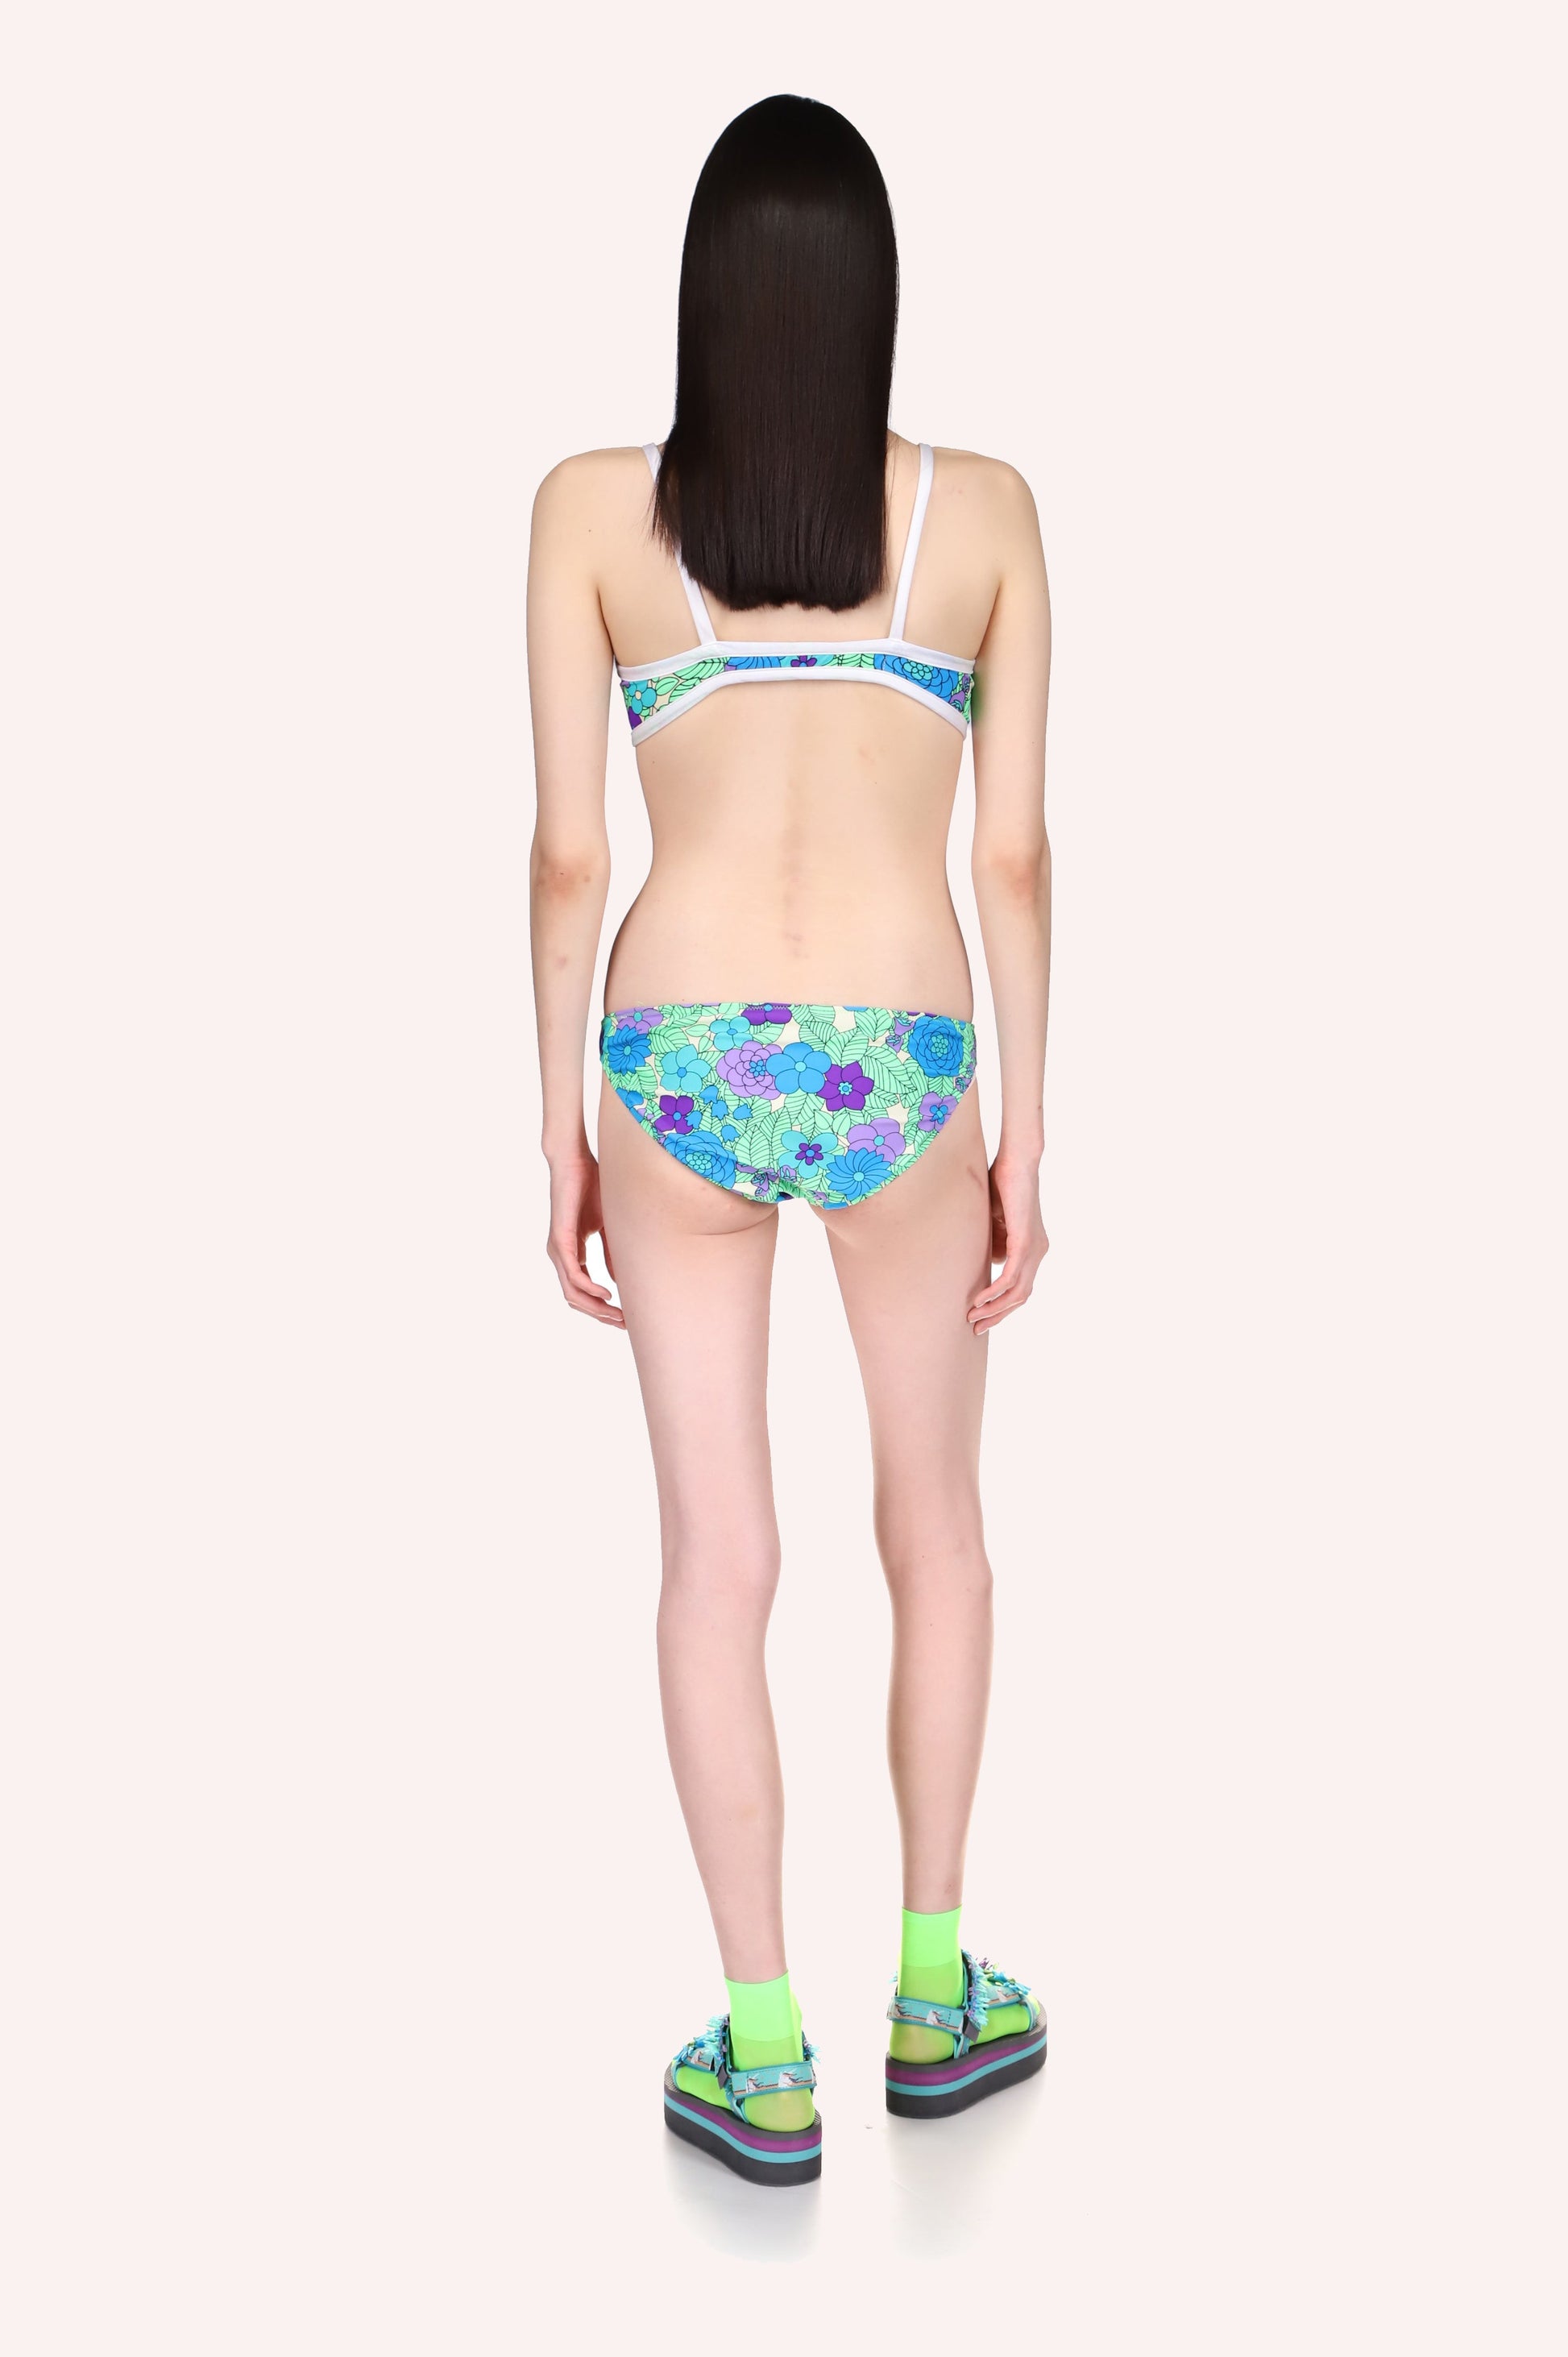 Beckoning Blossoms Bikini Set with adjustment straps on the back, the panty is at waistline high